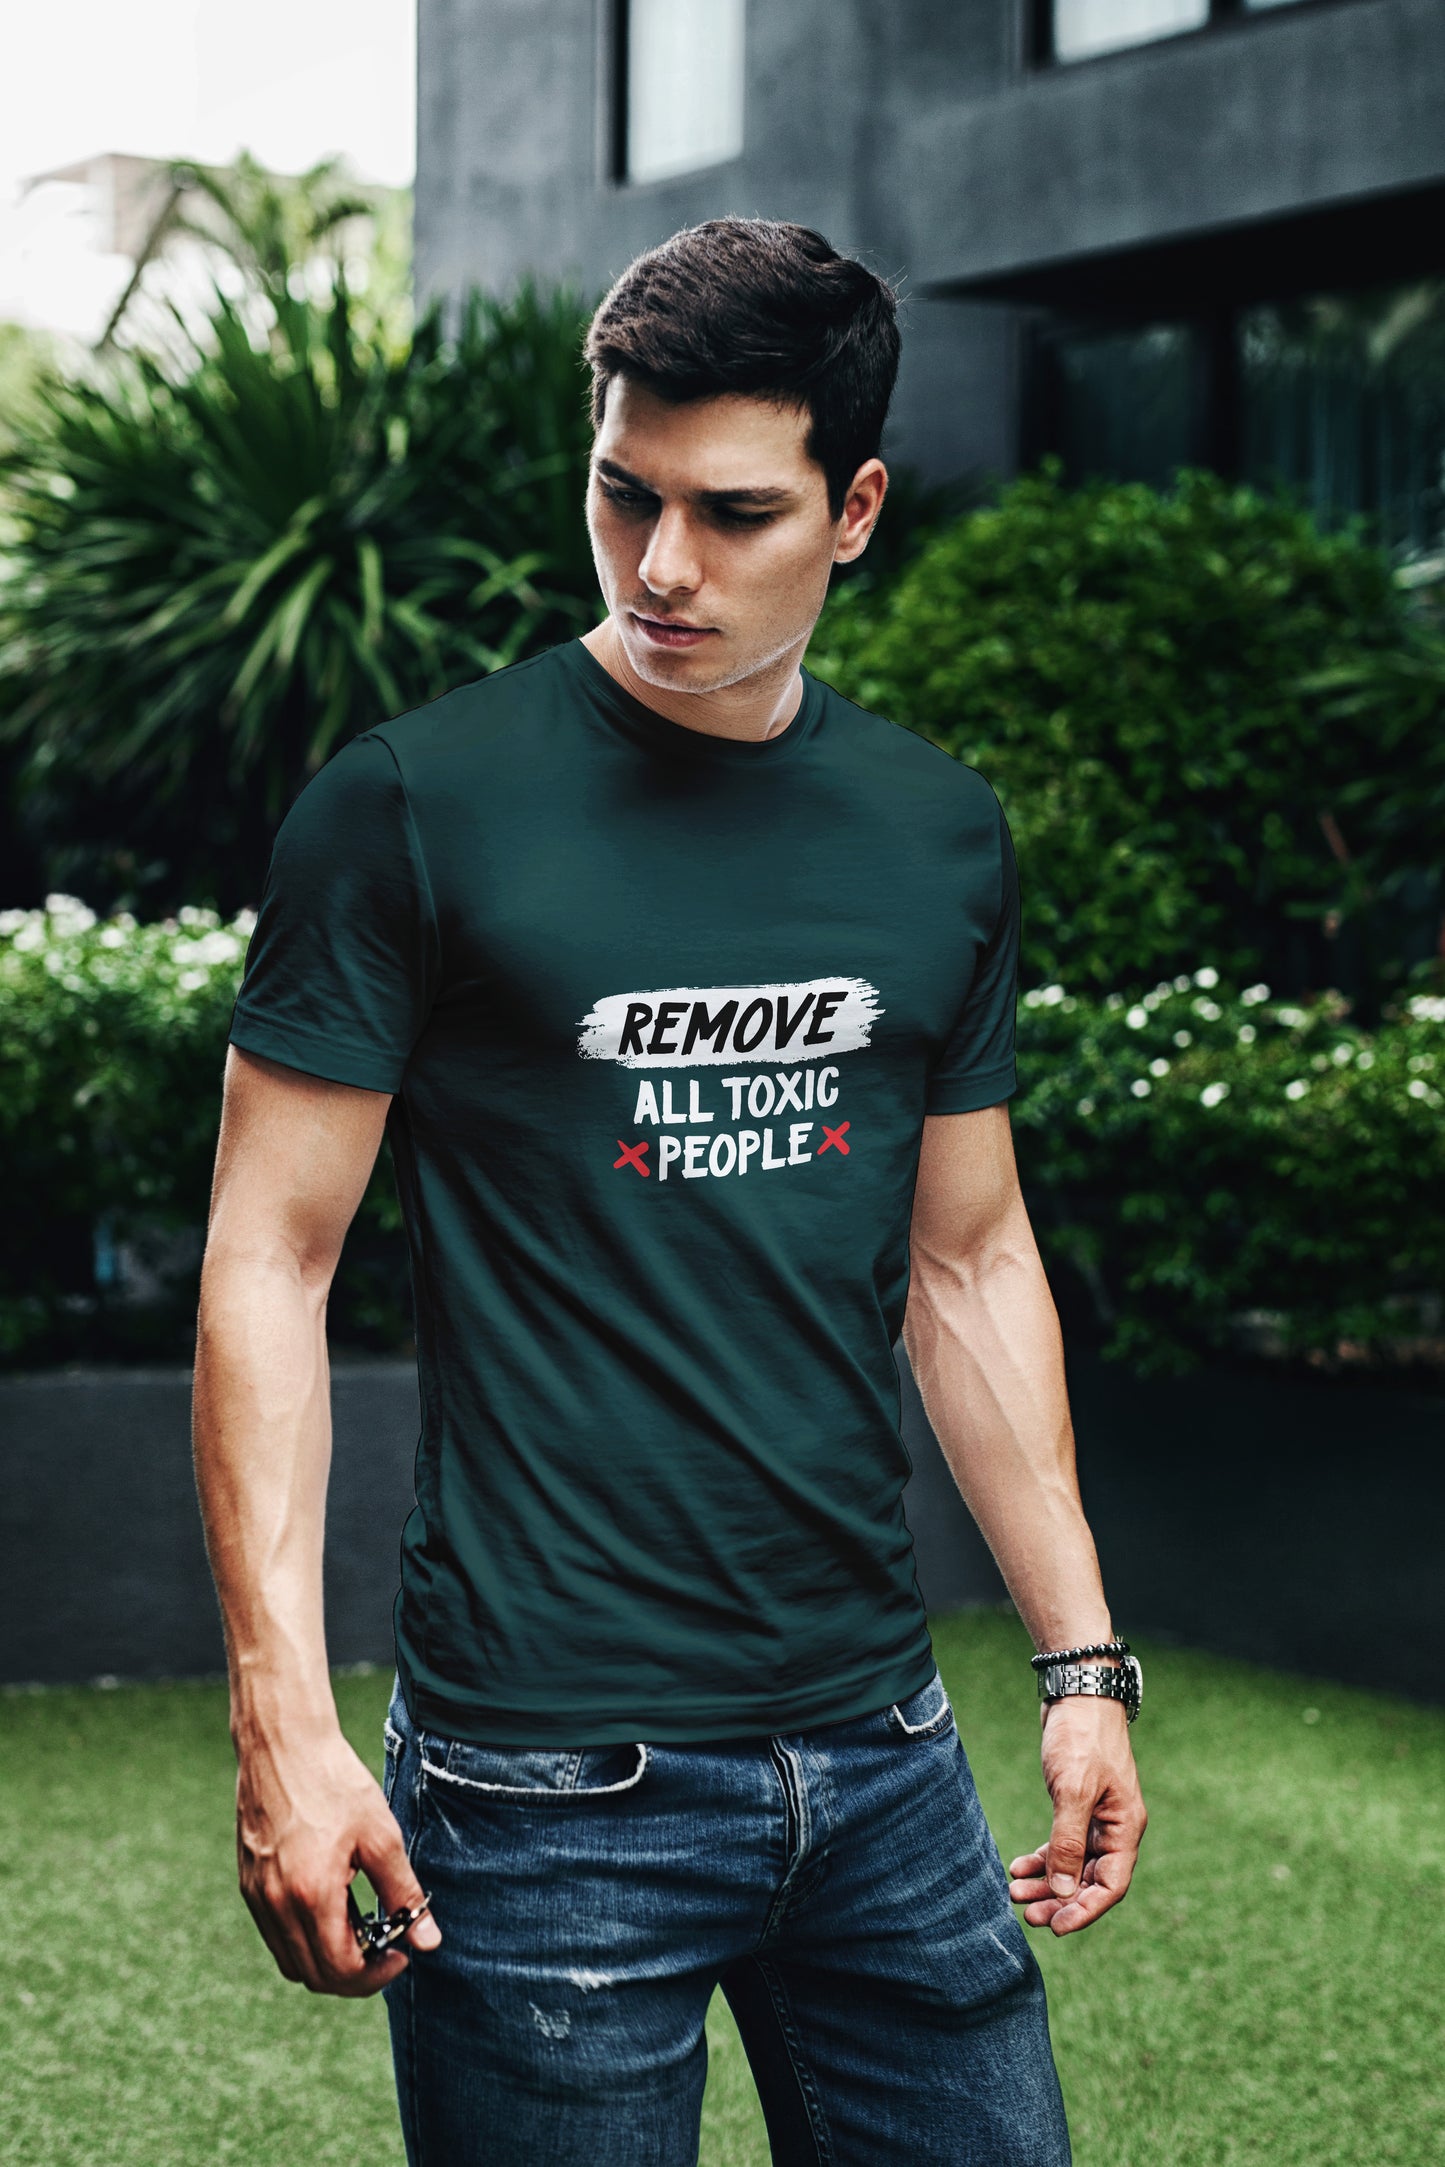 Remove all toxic people design T shirt